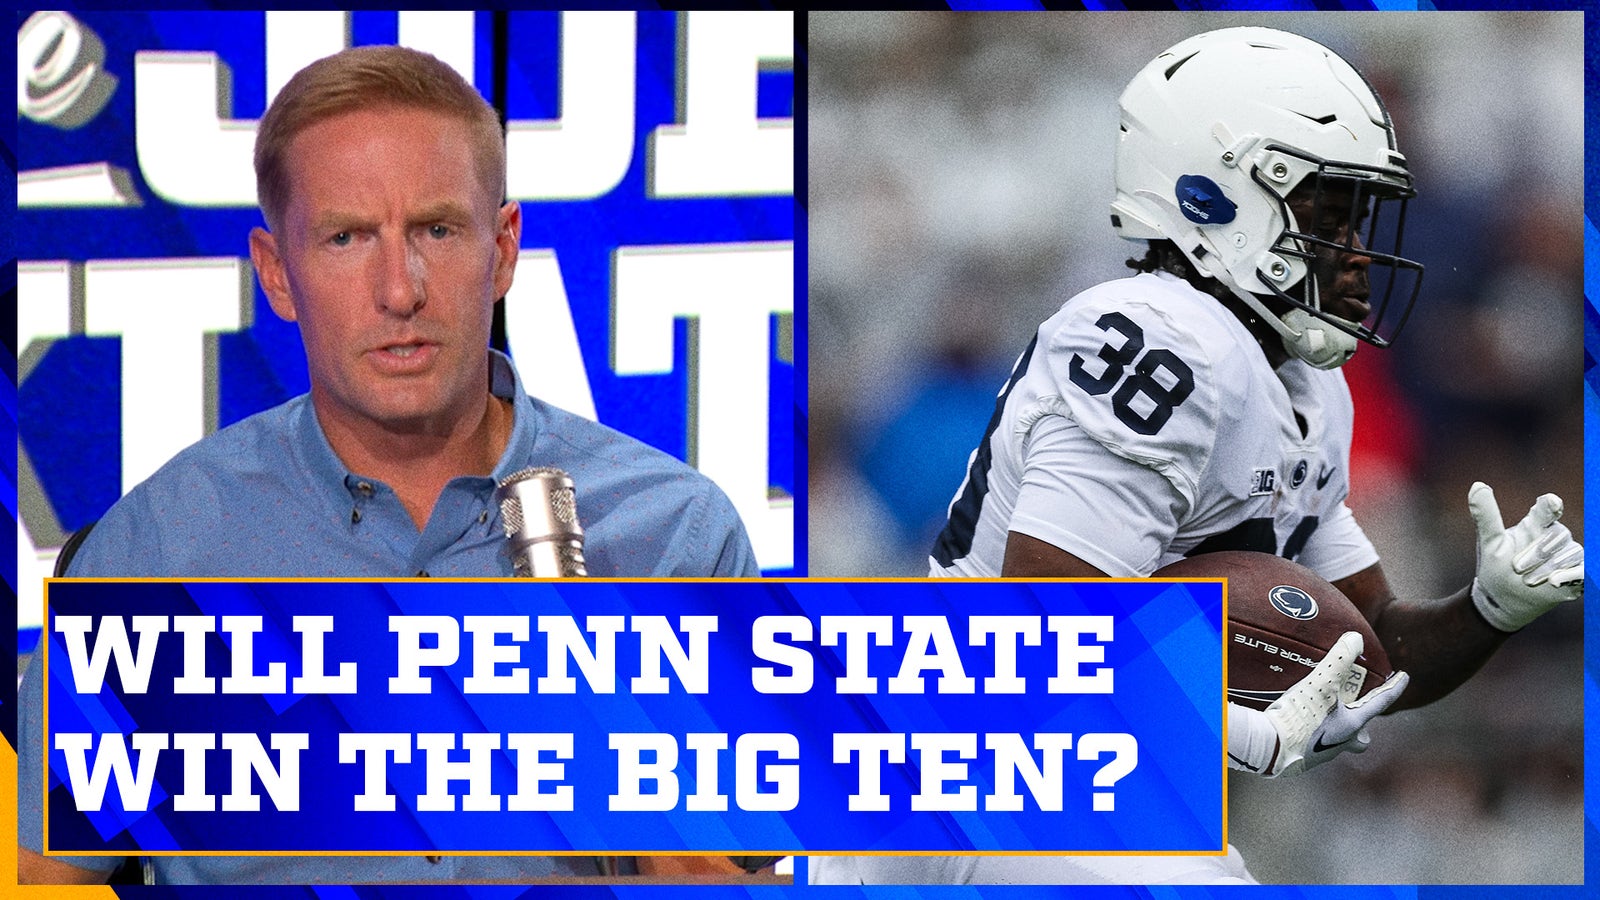 Michigan, Ohio State & Penn State: Who will come out on top?